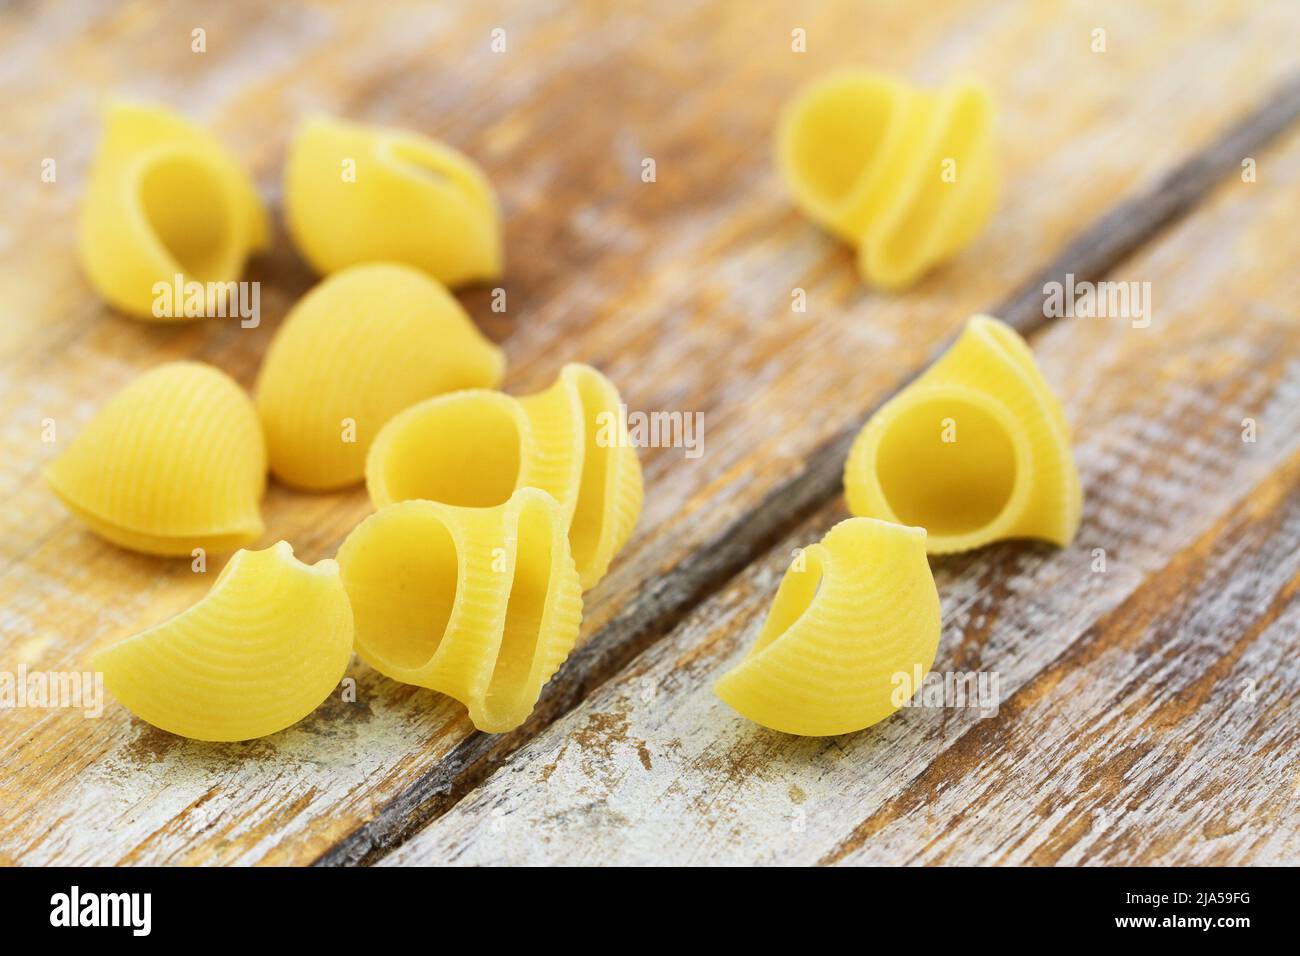 Uncooked Italian pasta scattered on rustic wooden surface Stock Photo